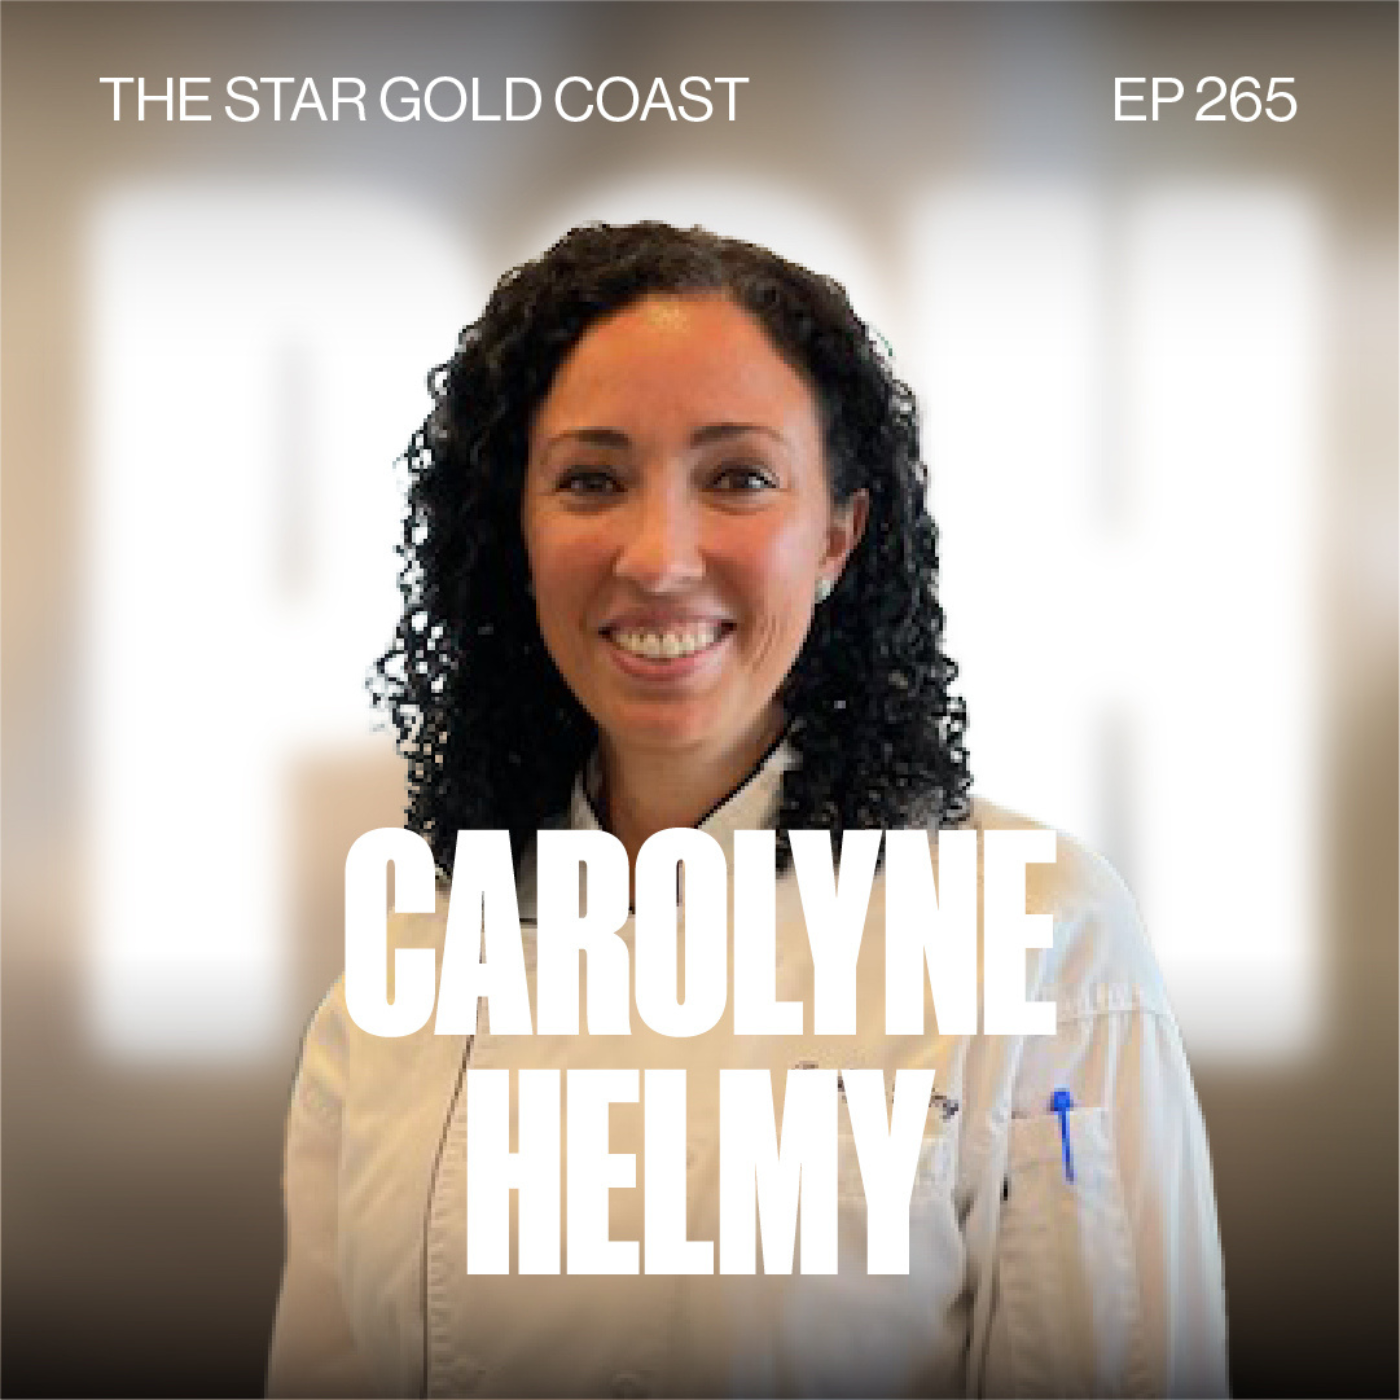 Ep 265:  From Corporate Life to a Delicious Detour with Chef Carolyne Helmy from The Star Gold Coast